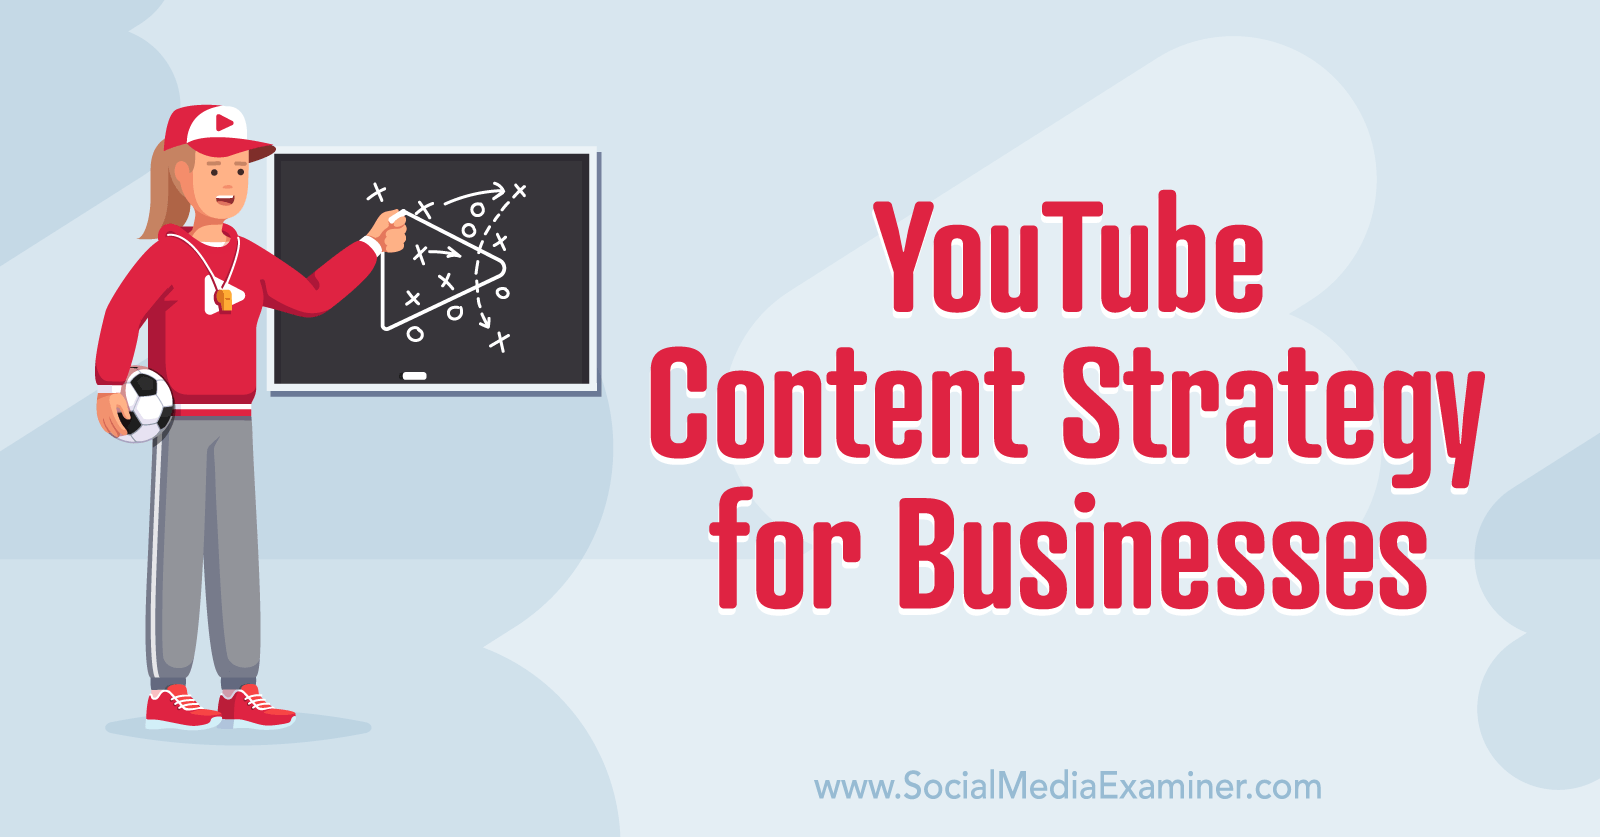 Content Strategy for Businesses : Social Media Examiner